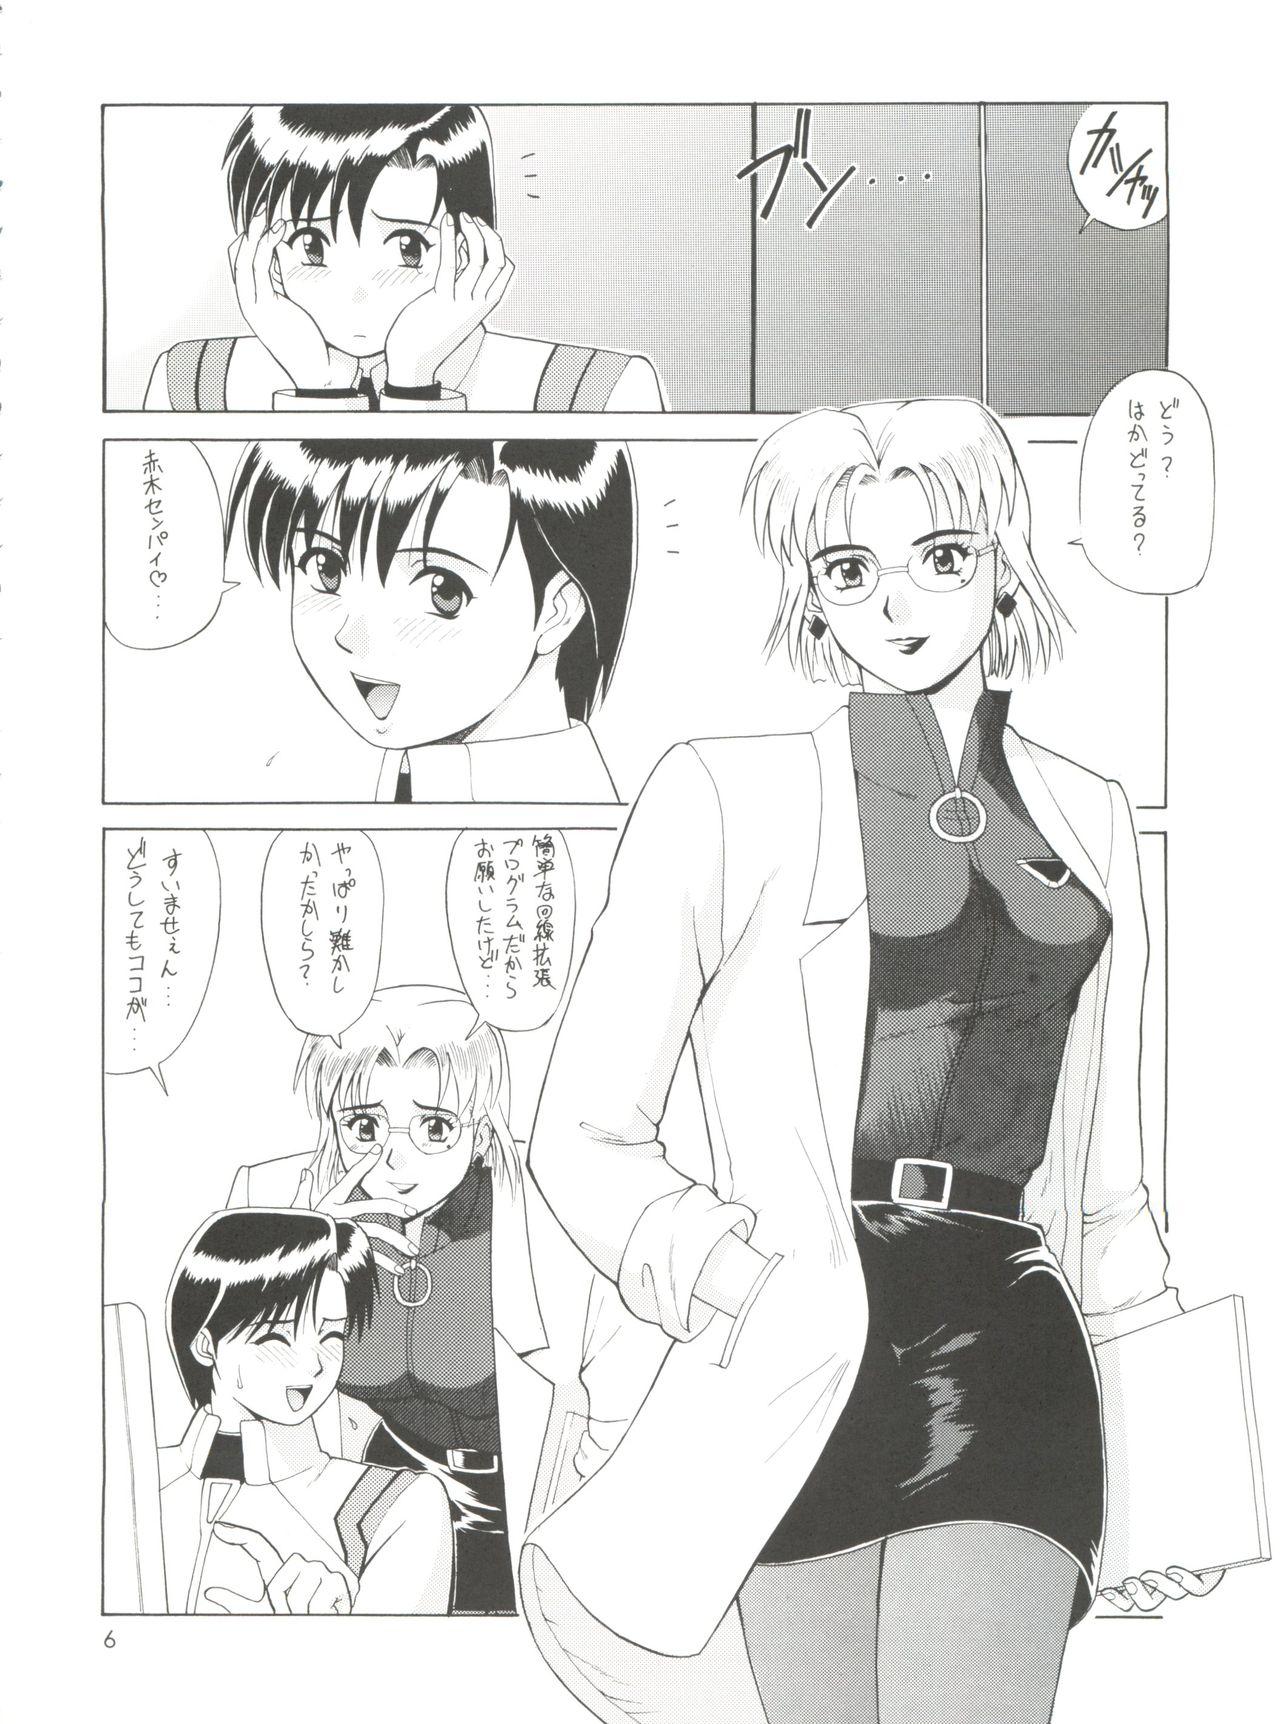 Puto Suite For My Sweet Shinteiban - Neon genesis evangelion Sis - Page 5